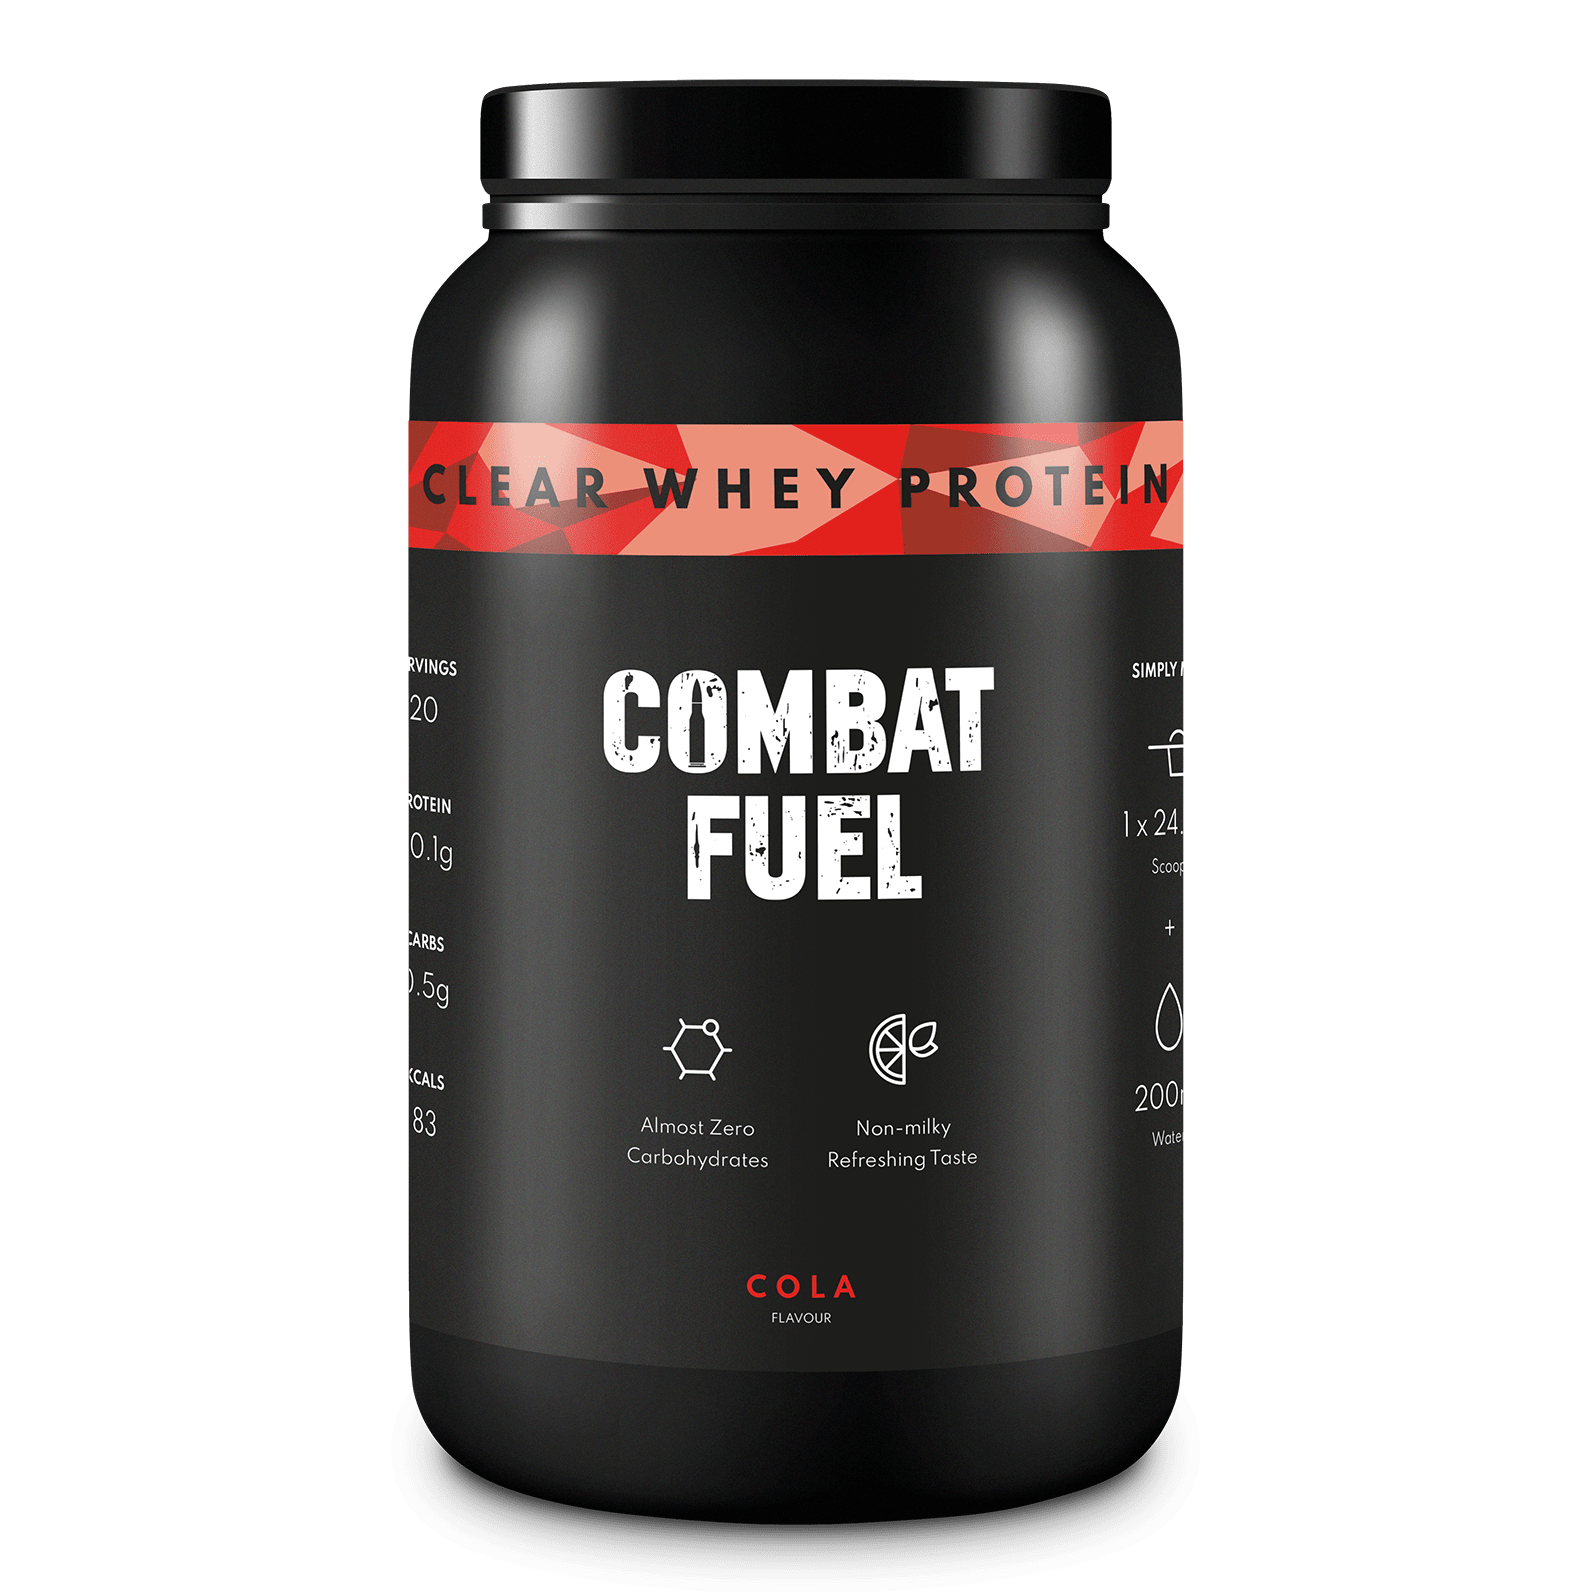 Combat Fuel - Clear Whey Protein - Full Boar Sports